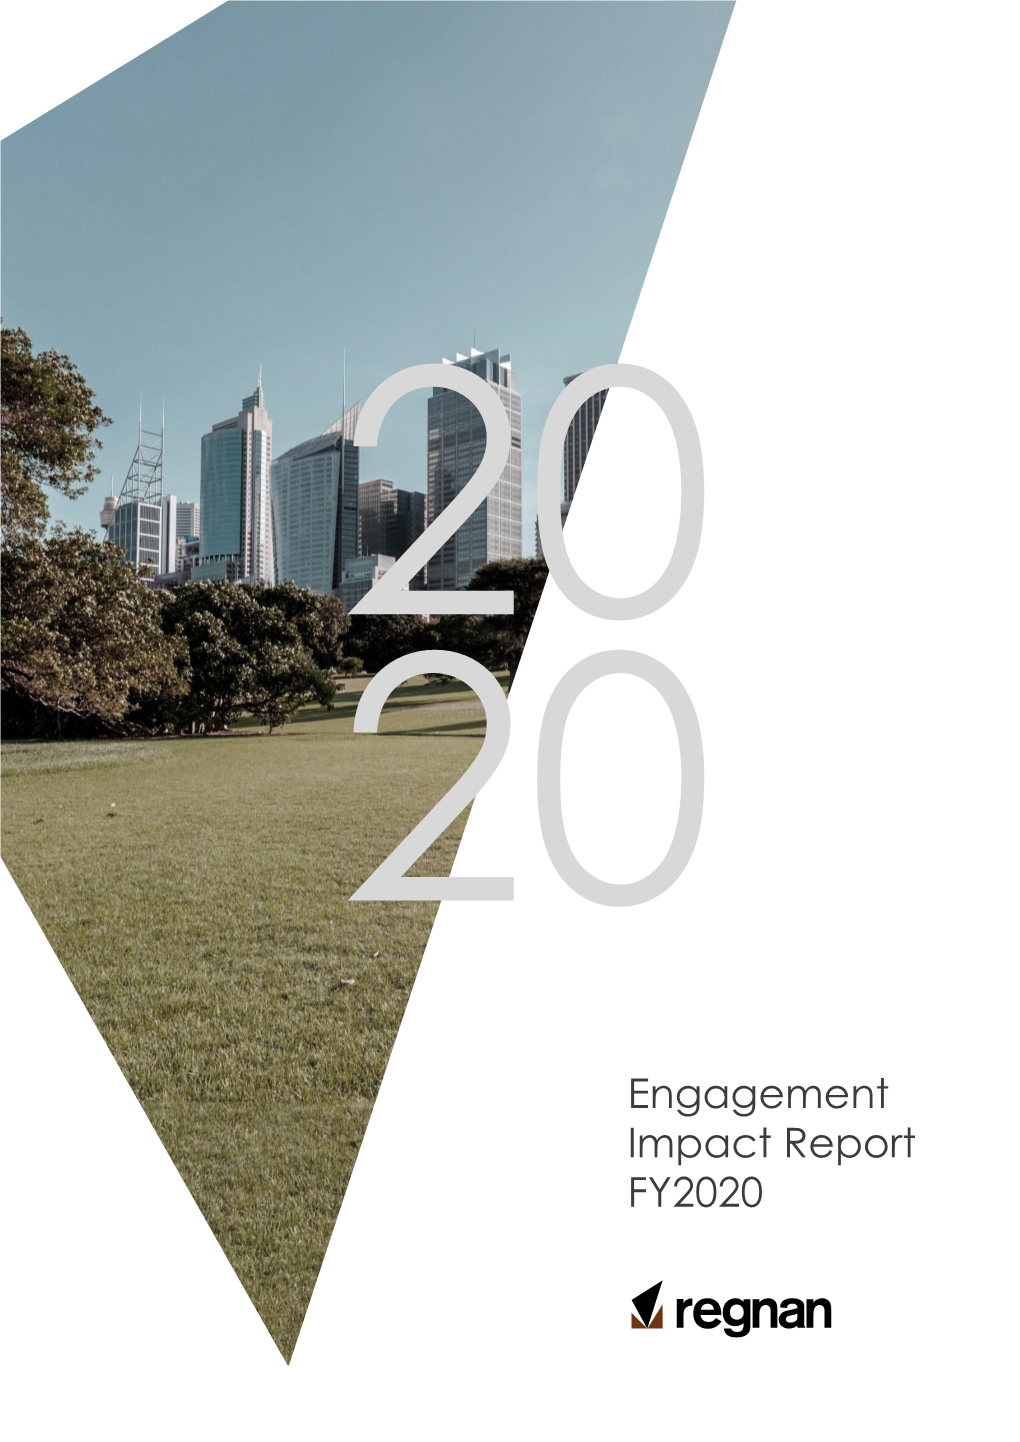 Regnan Annual Engagement Impact Report FY2020